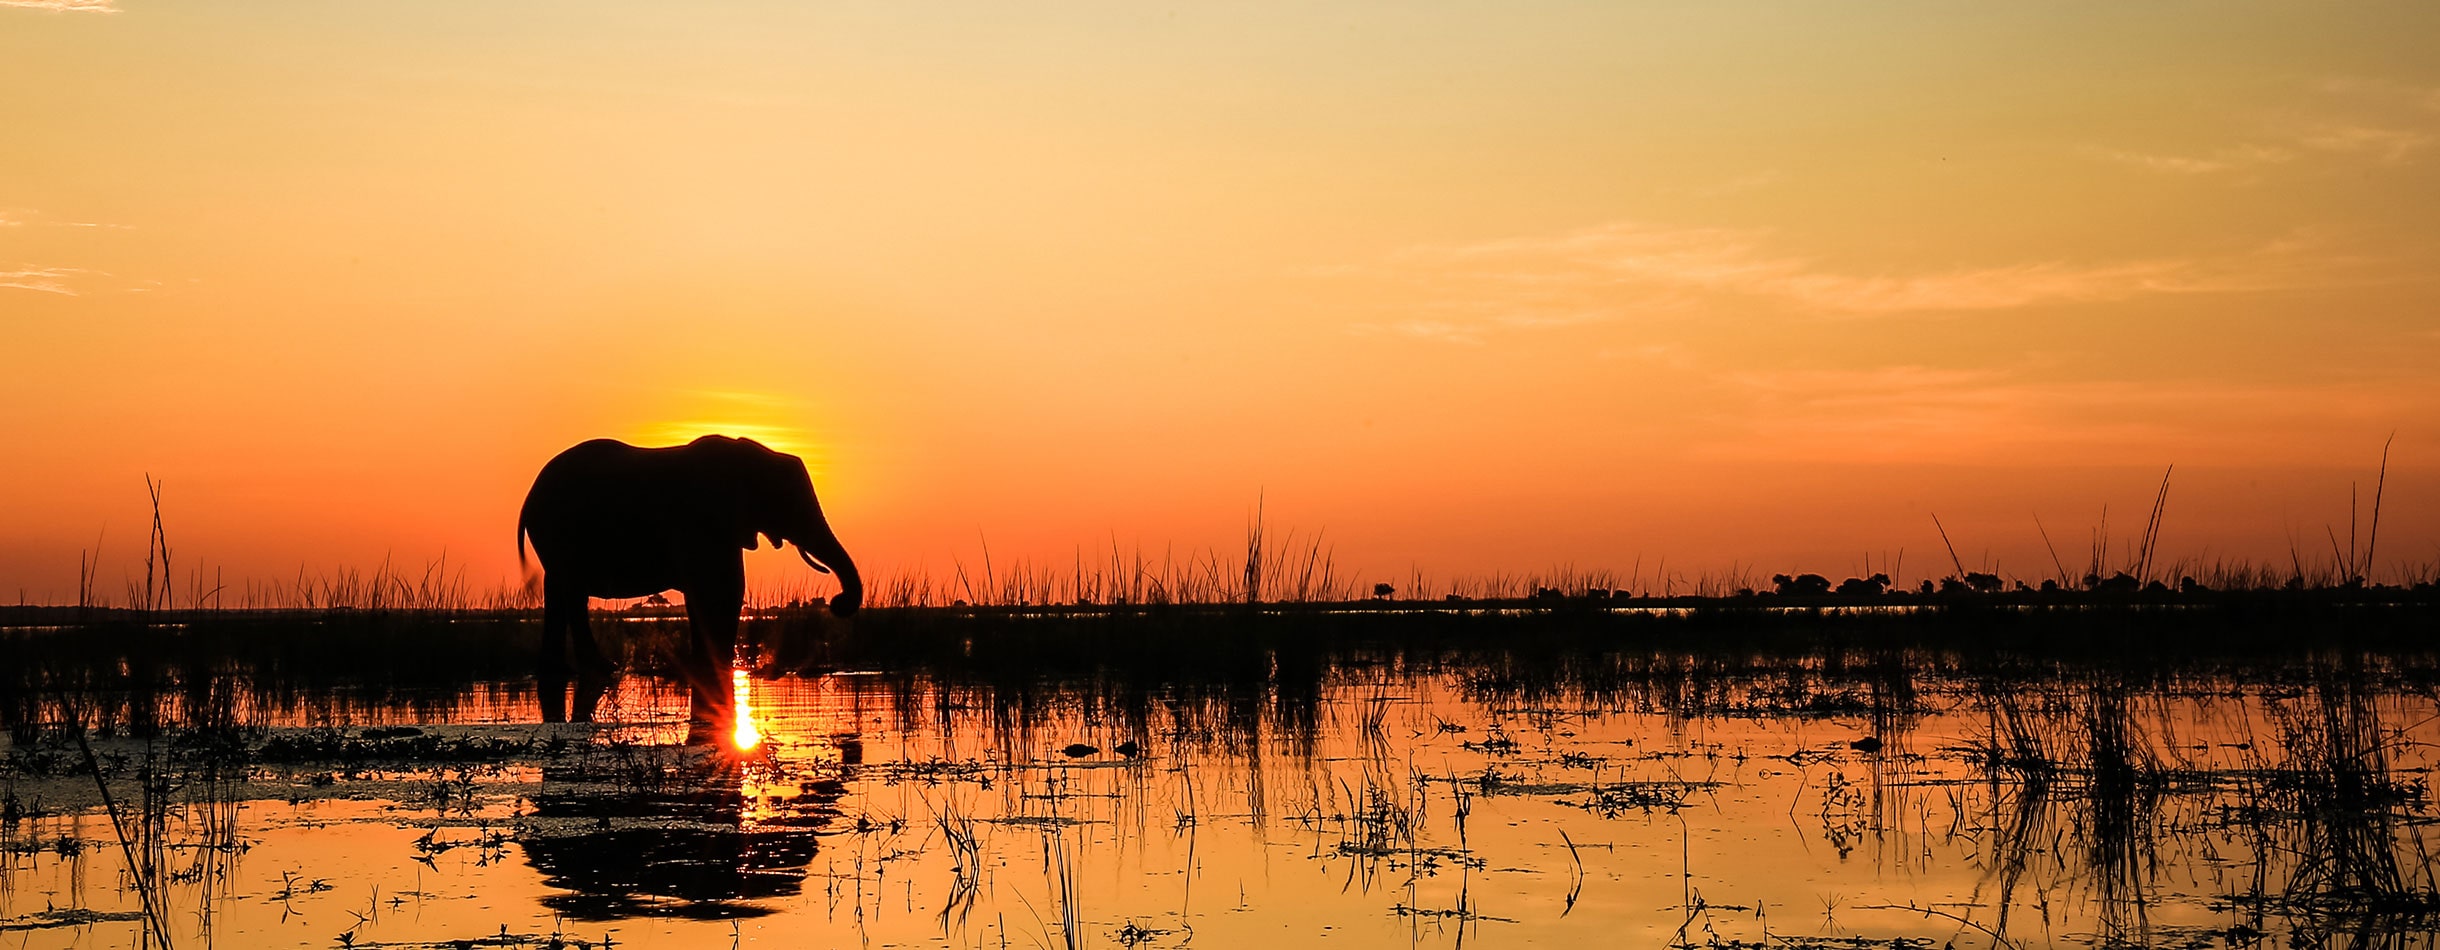 Elephant in the wild at sunset